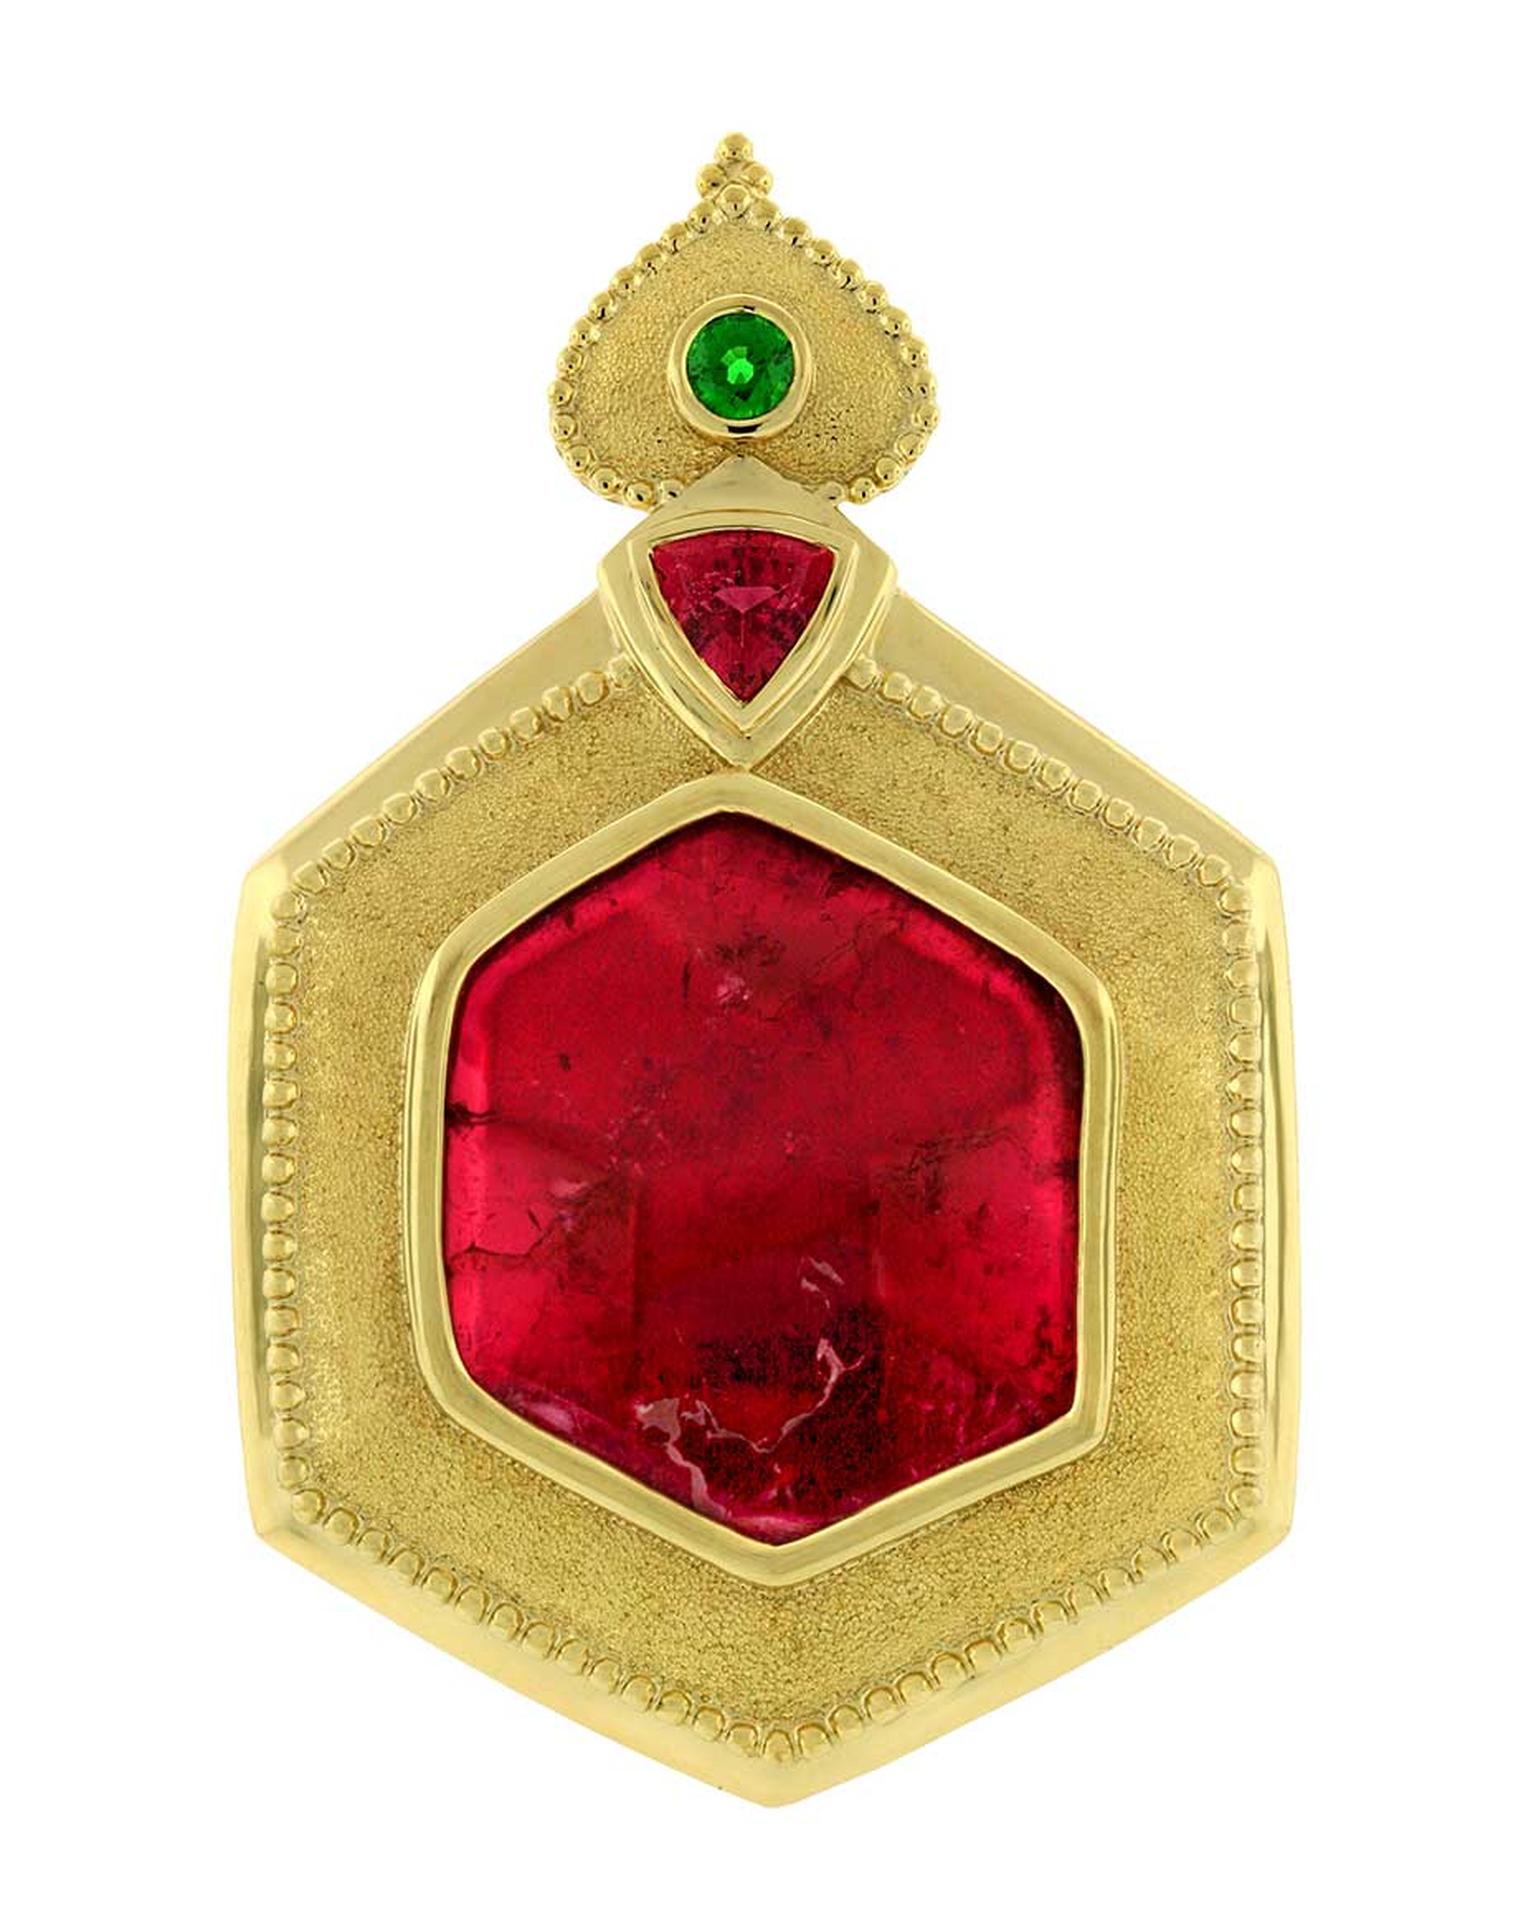 One-of-a-kind Paula Crevoshay pendant in gold, set with a 35.67ct tourmaline, a 1.95ct tourmaline and a tsavorite.